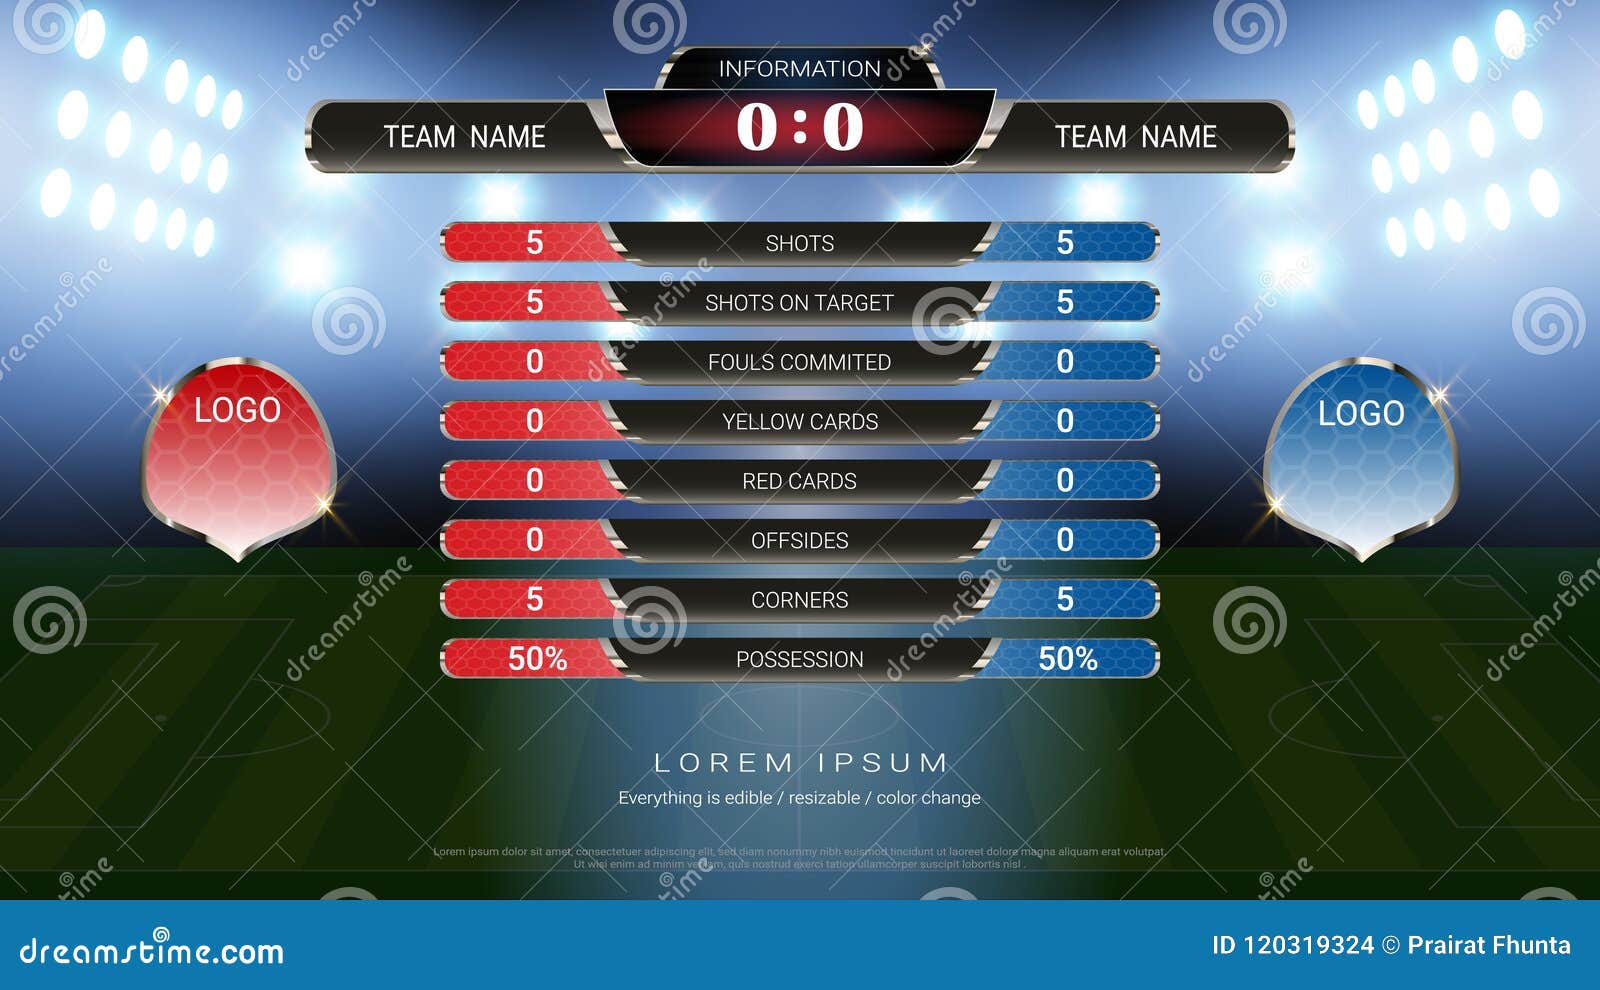 Football Scoreboard Team a Vs Team B and Global Stats Broadcast Graphic Soccer Template, for Your Presentation of the Match Result Stock Vector